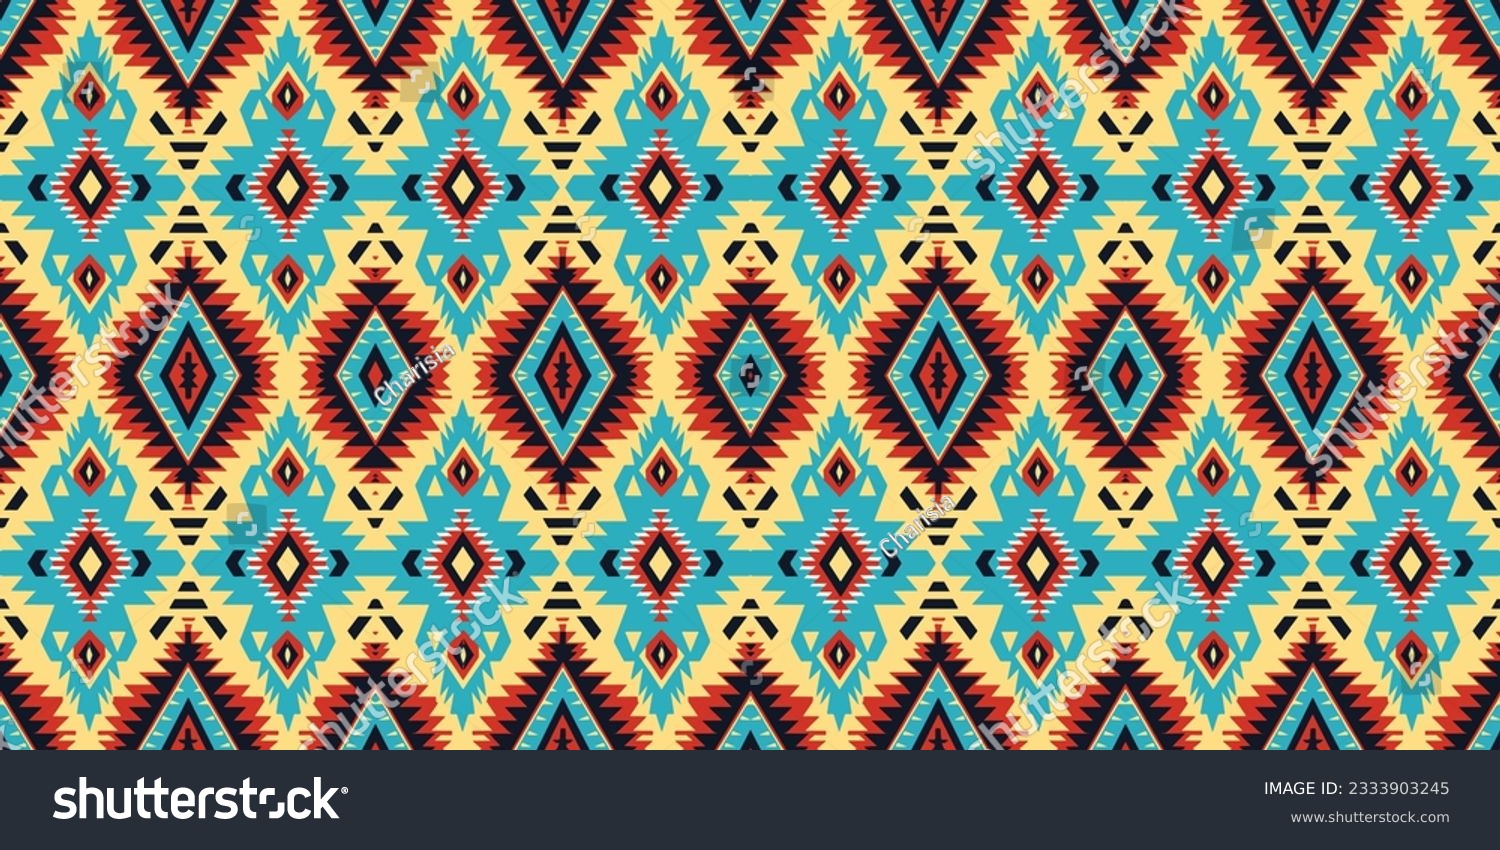 SVG of Seamless batik pattern,Seamless Betawi batik pattern,and Seamless motif pattern resemble ethnic boho, Aztec,and ikat styles.designed for use in satin,wallpaper,fabric,curtain,carpet,Batik Embroidery svg